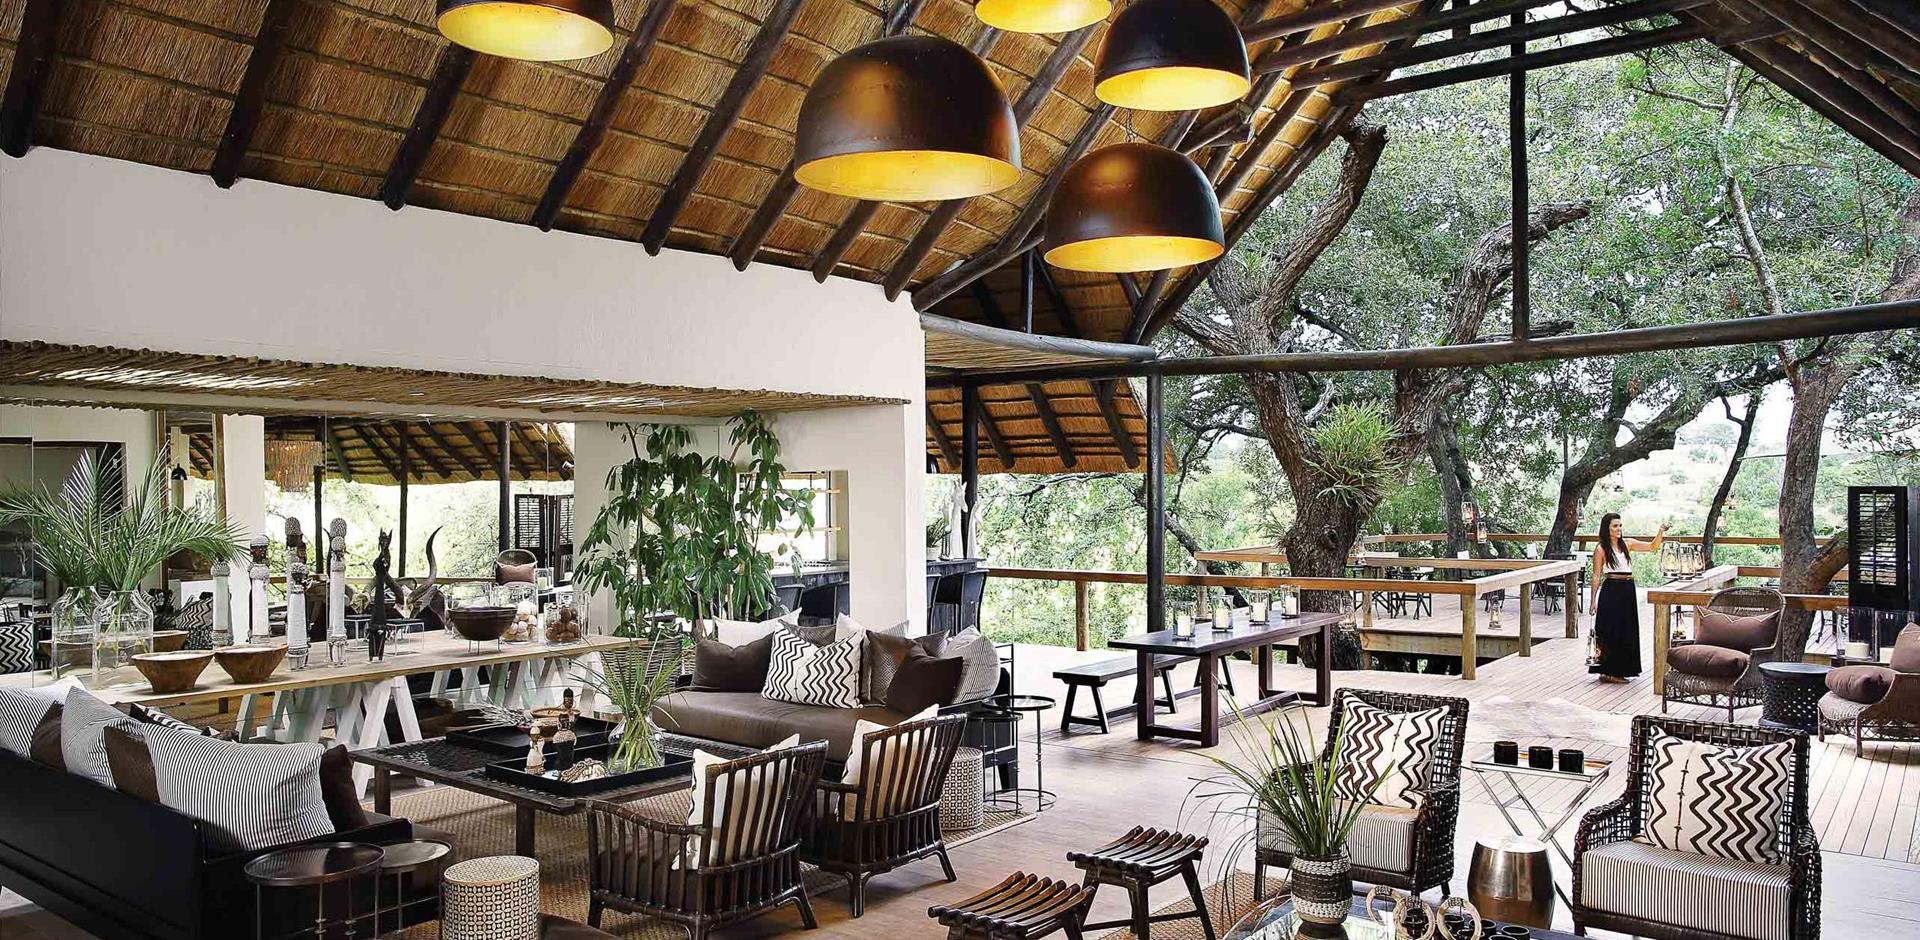 Lounge and interior, Londolozi Tree Camp, South Africa, A&K